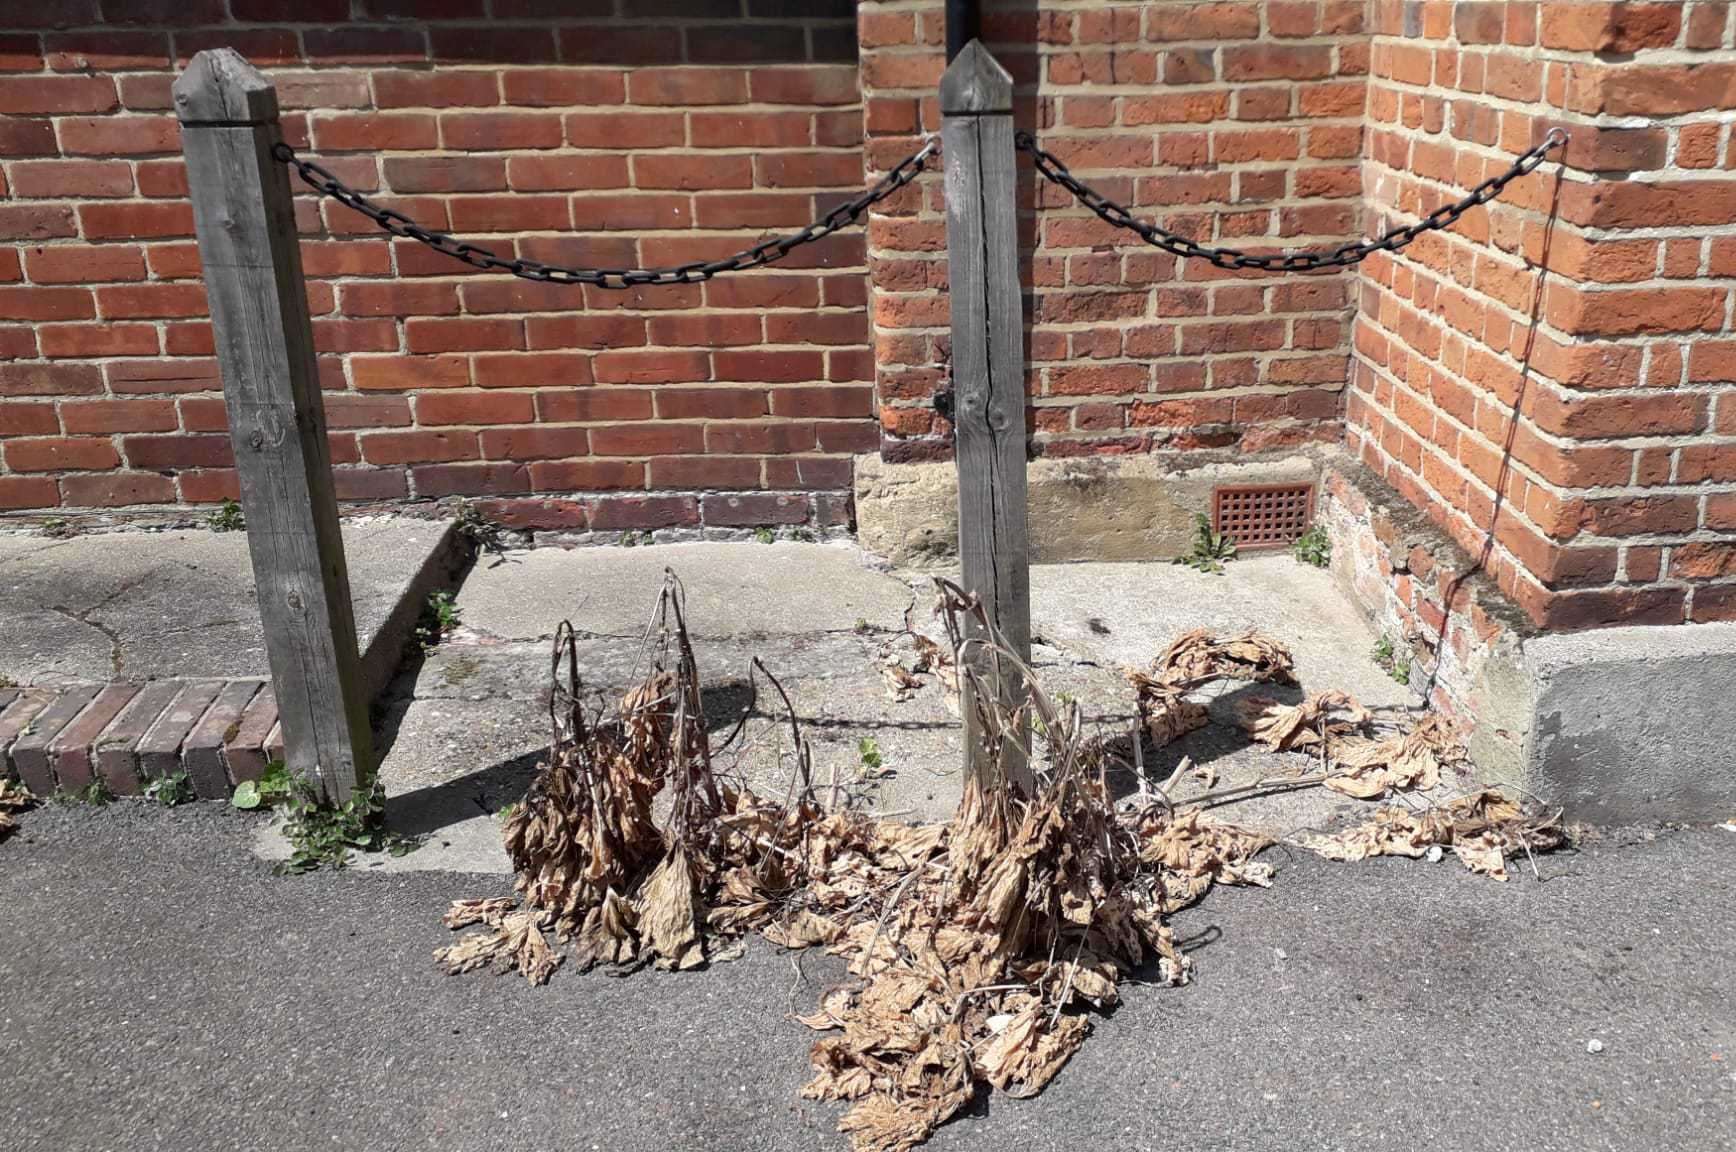 Gardener Susan Mortimer has left the dried up greenery there to highlight the issue of the council’s over-zealous herbicide use